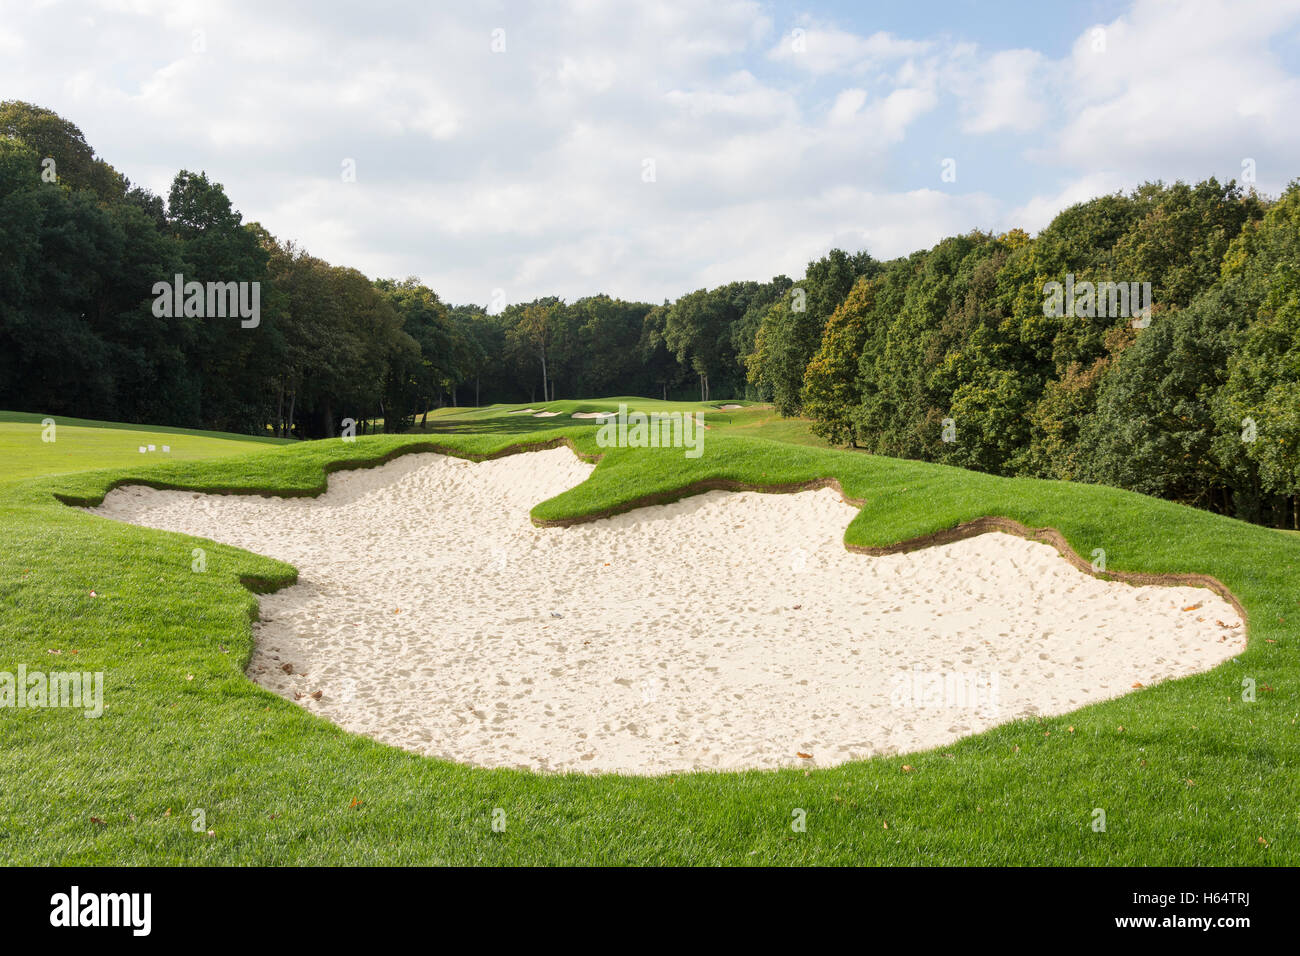 Le golf fairway et bunkers au Wentworth Golf Club & Resort, Virginia Water, Surrey, Angleterre, Royaume-Uni Banque D'Images